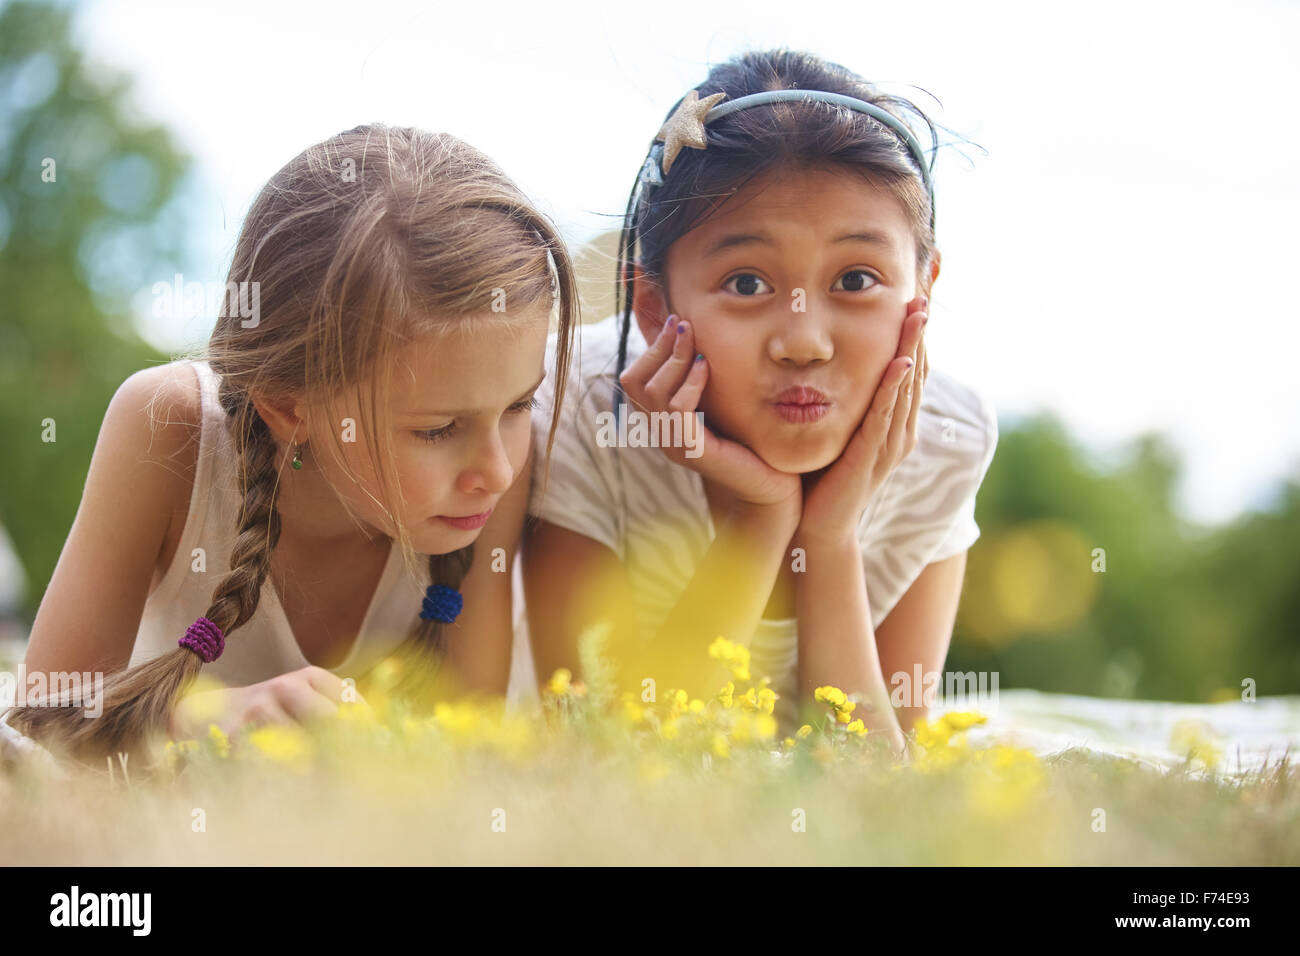 Girl and her friend on the grass making funny faces Stock Photo